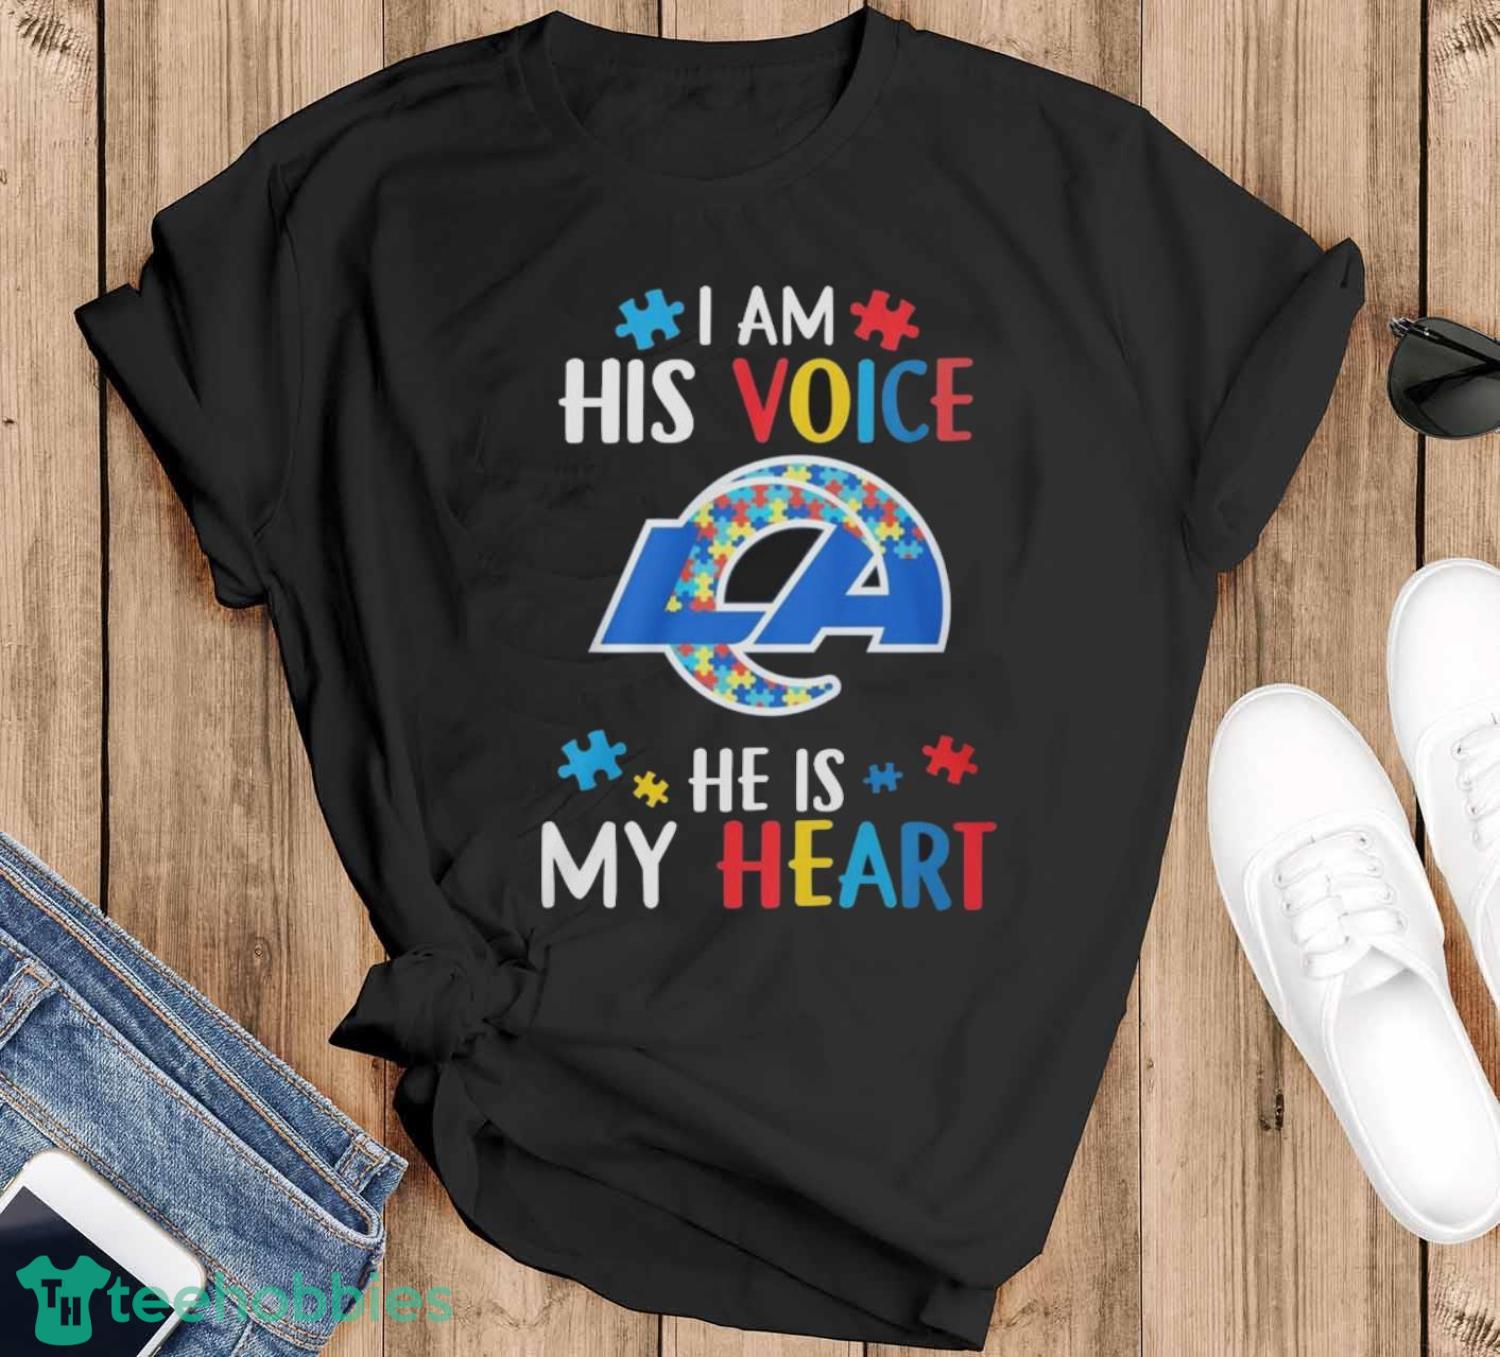 Los Angeles Rams Autism I Am His Voice He Is My Heart T-Shirt - Black T-Shirt